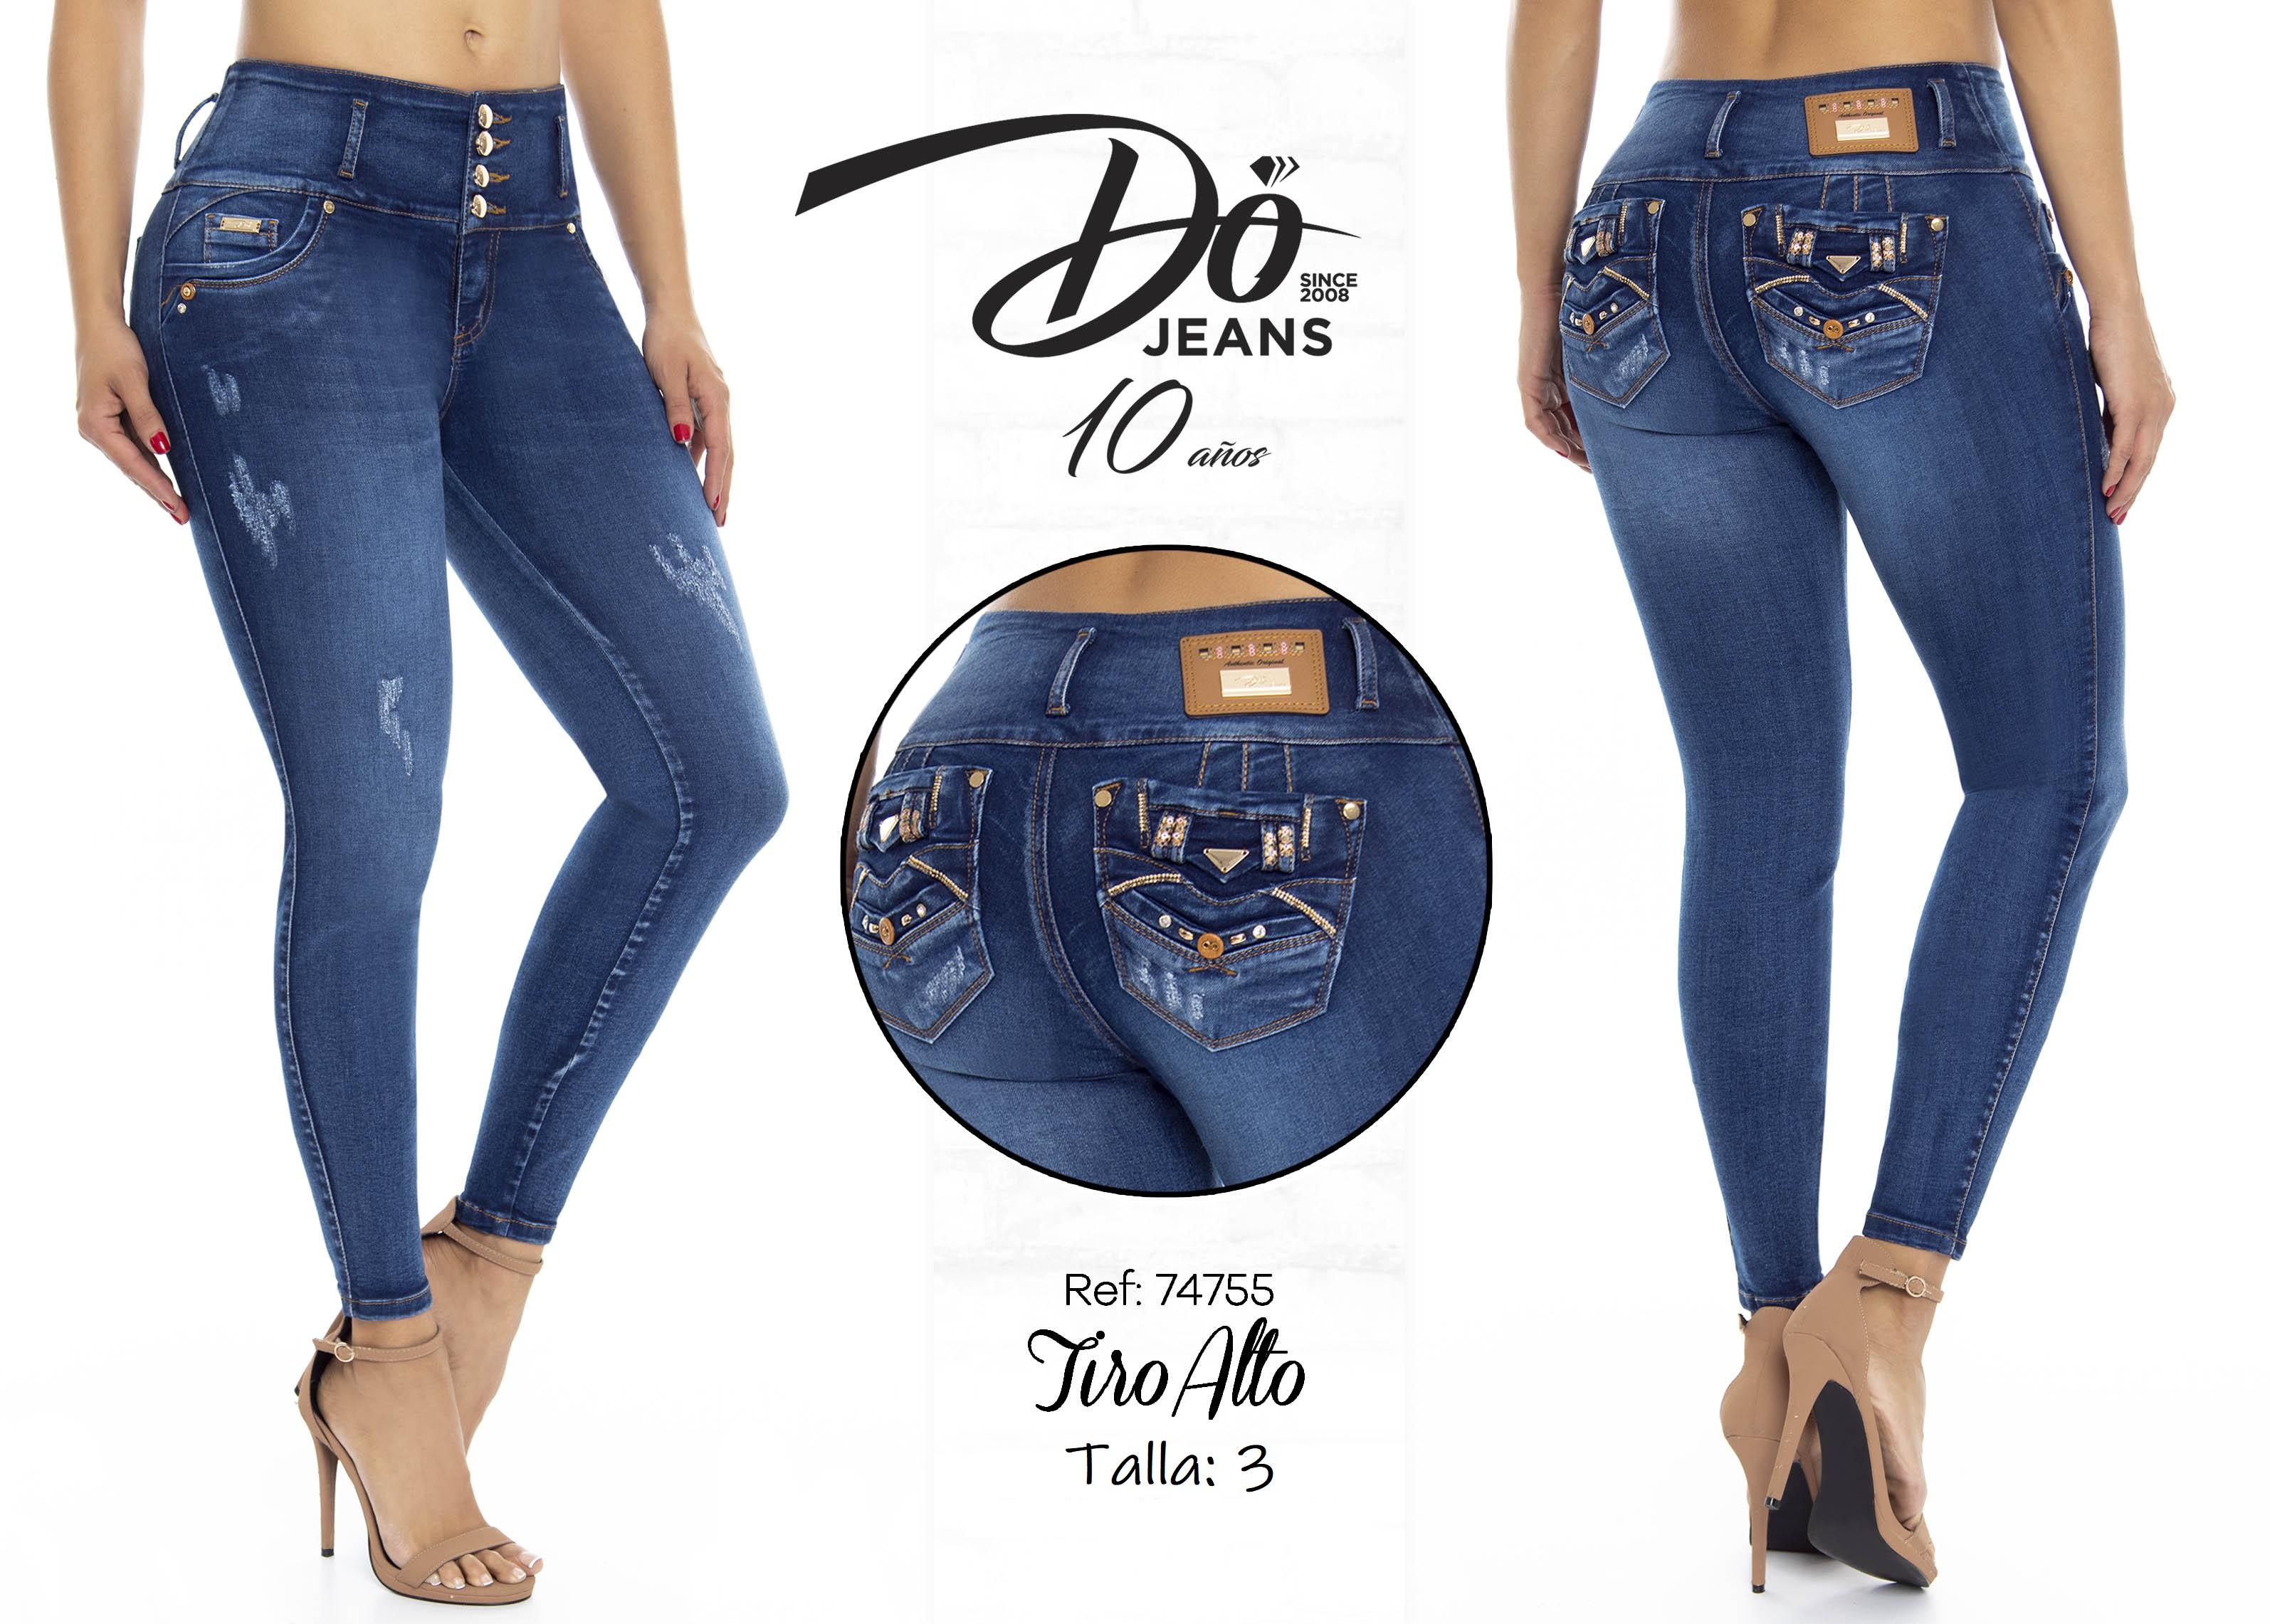 Jeans Levantacola Colombiano - Ref. 248 -74755 D